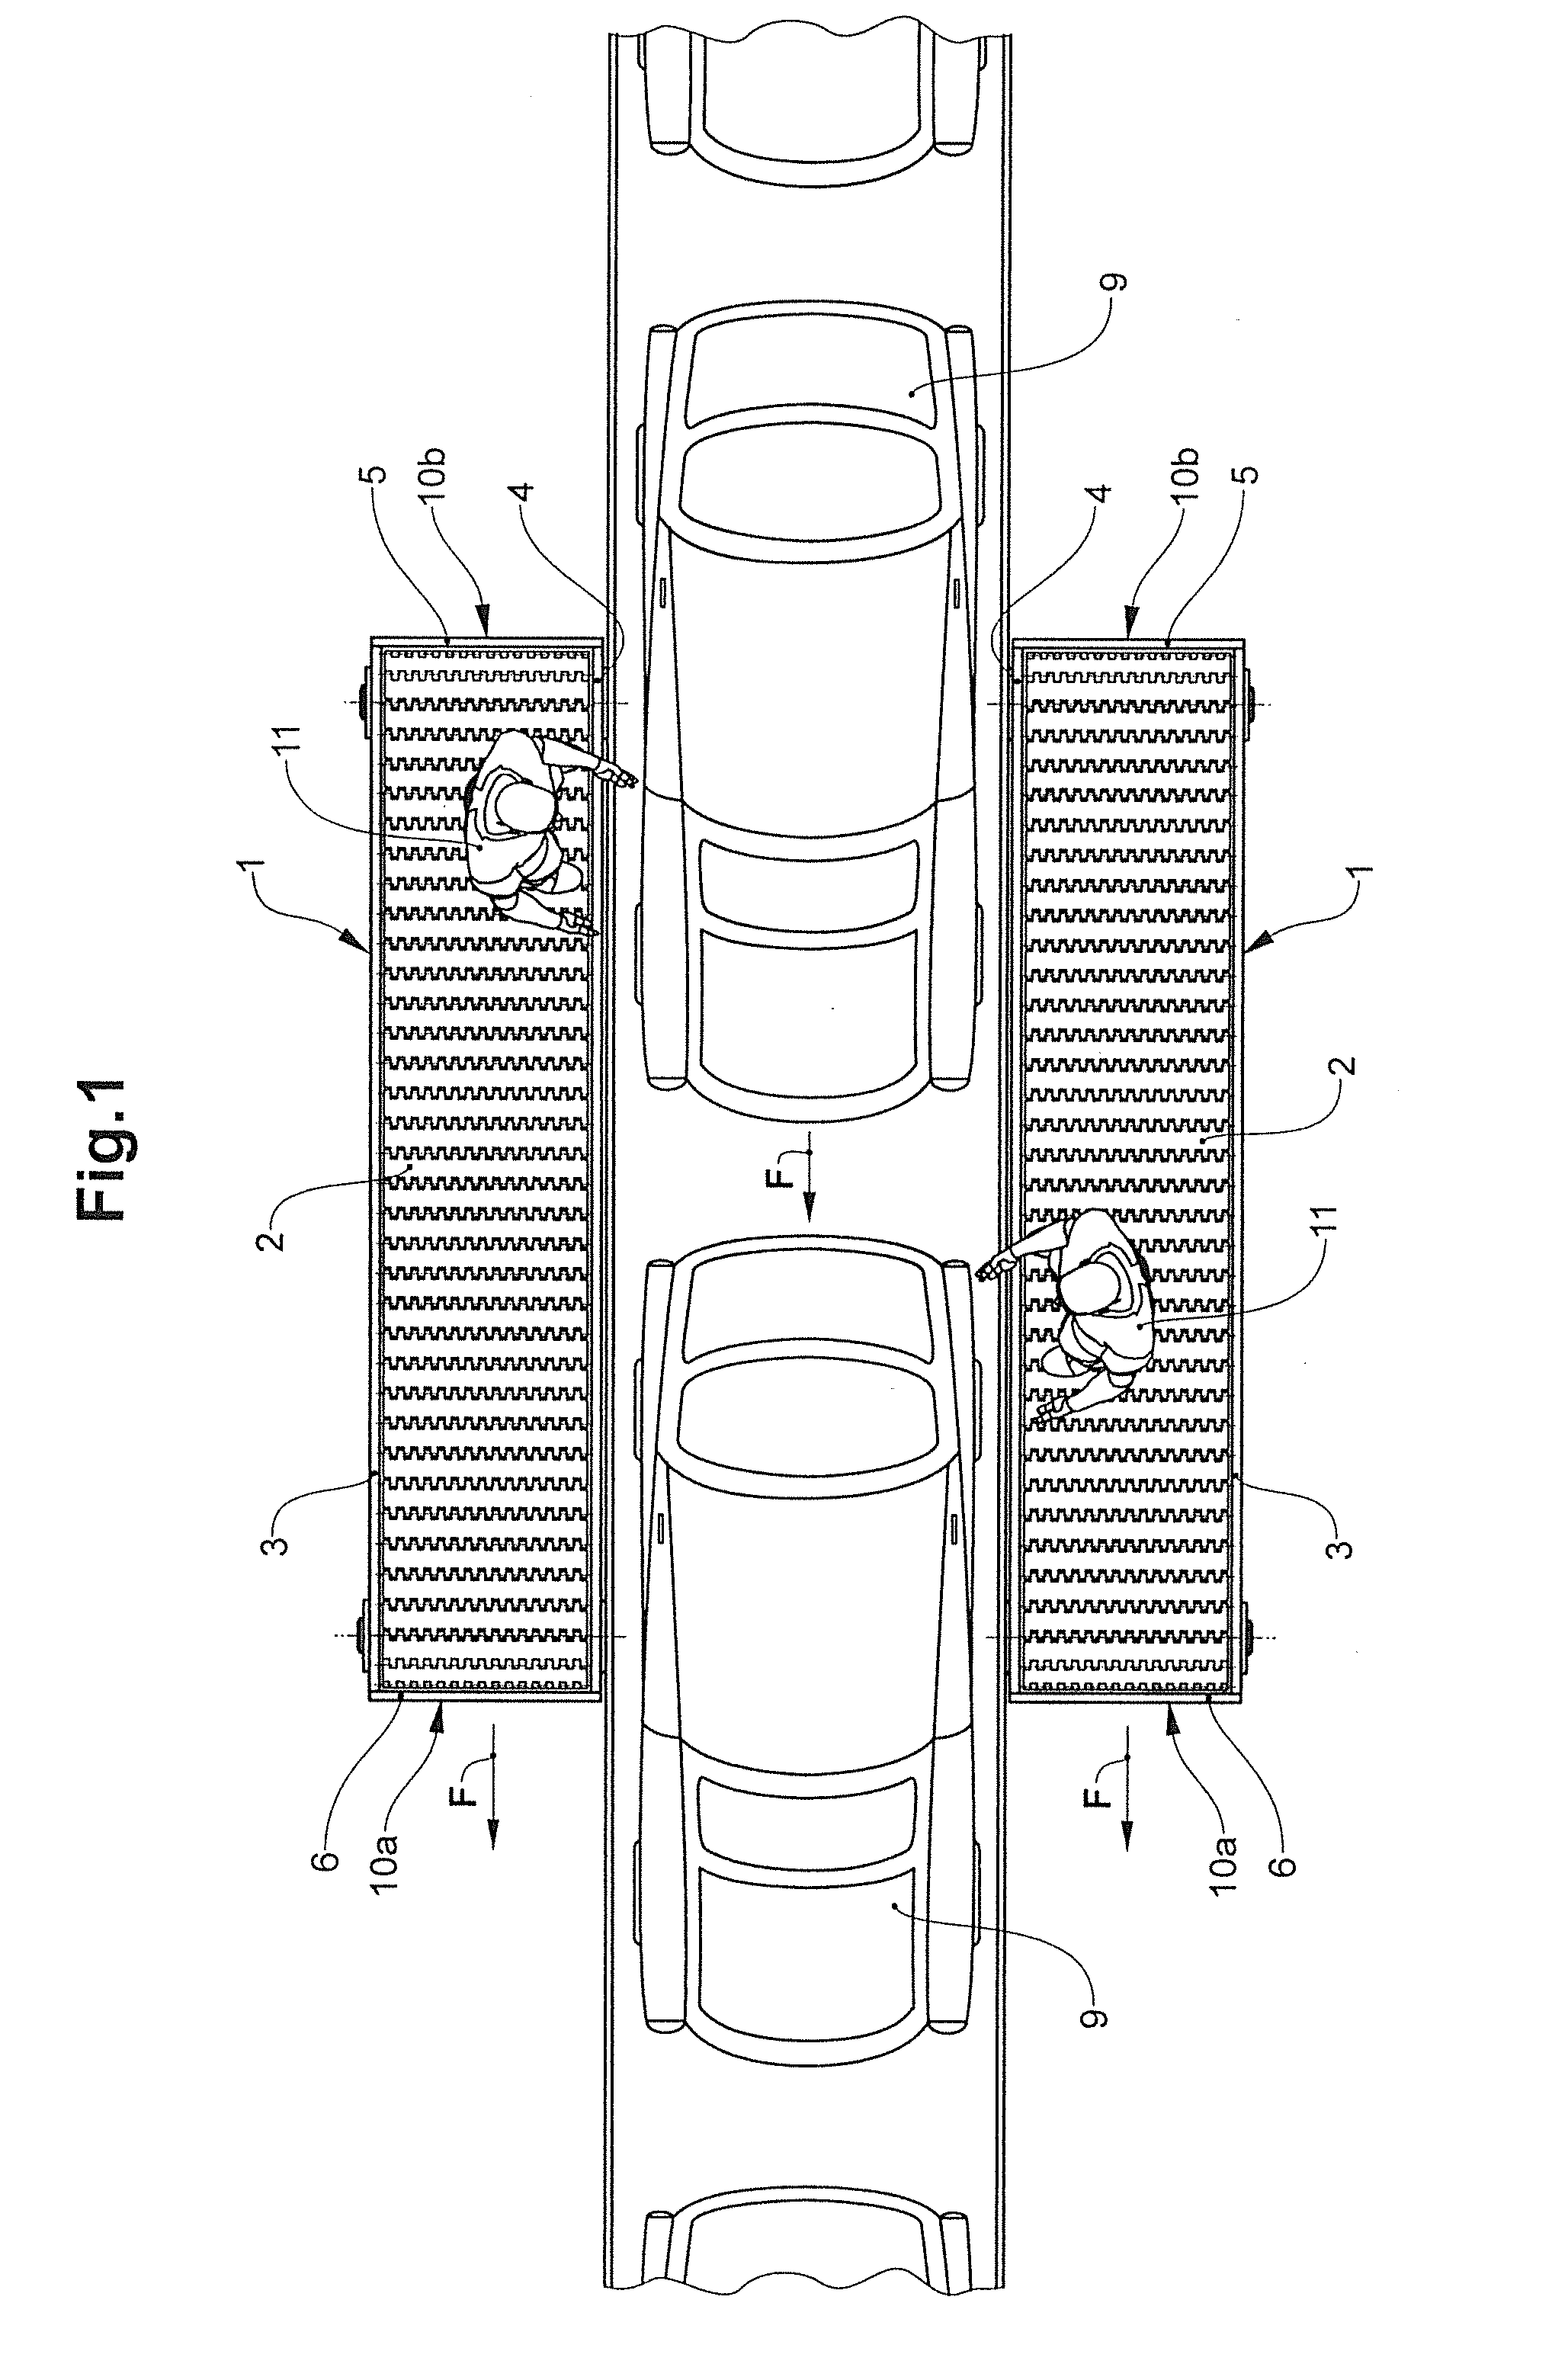 Conveying device with an extensively extended conveying element